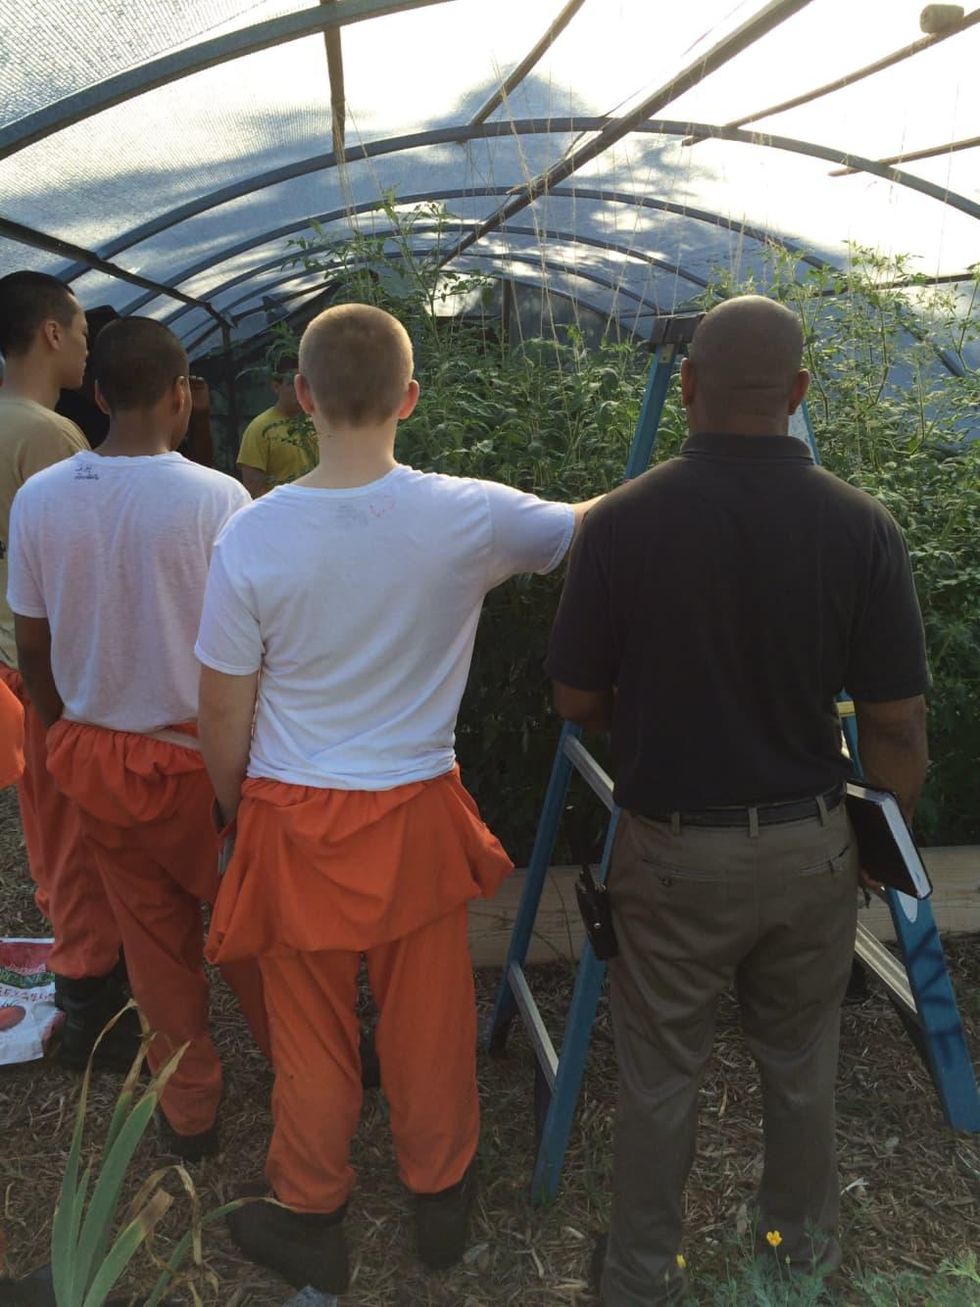 Young men in the Horticulture Therapy program manage the gardens at Youth Village